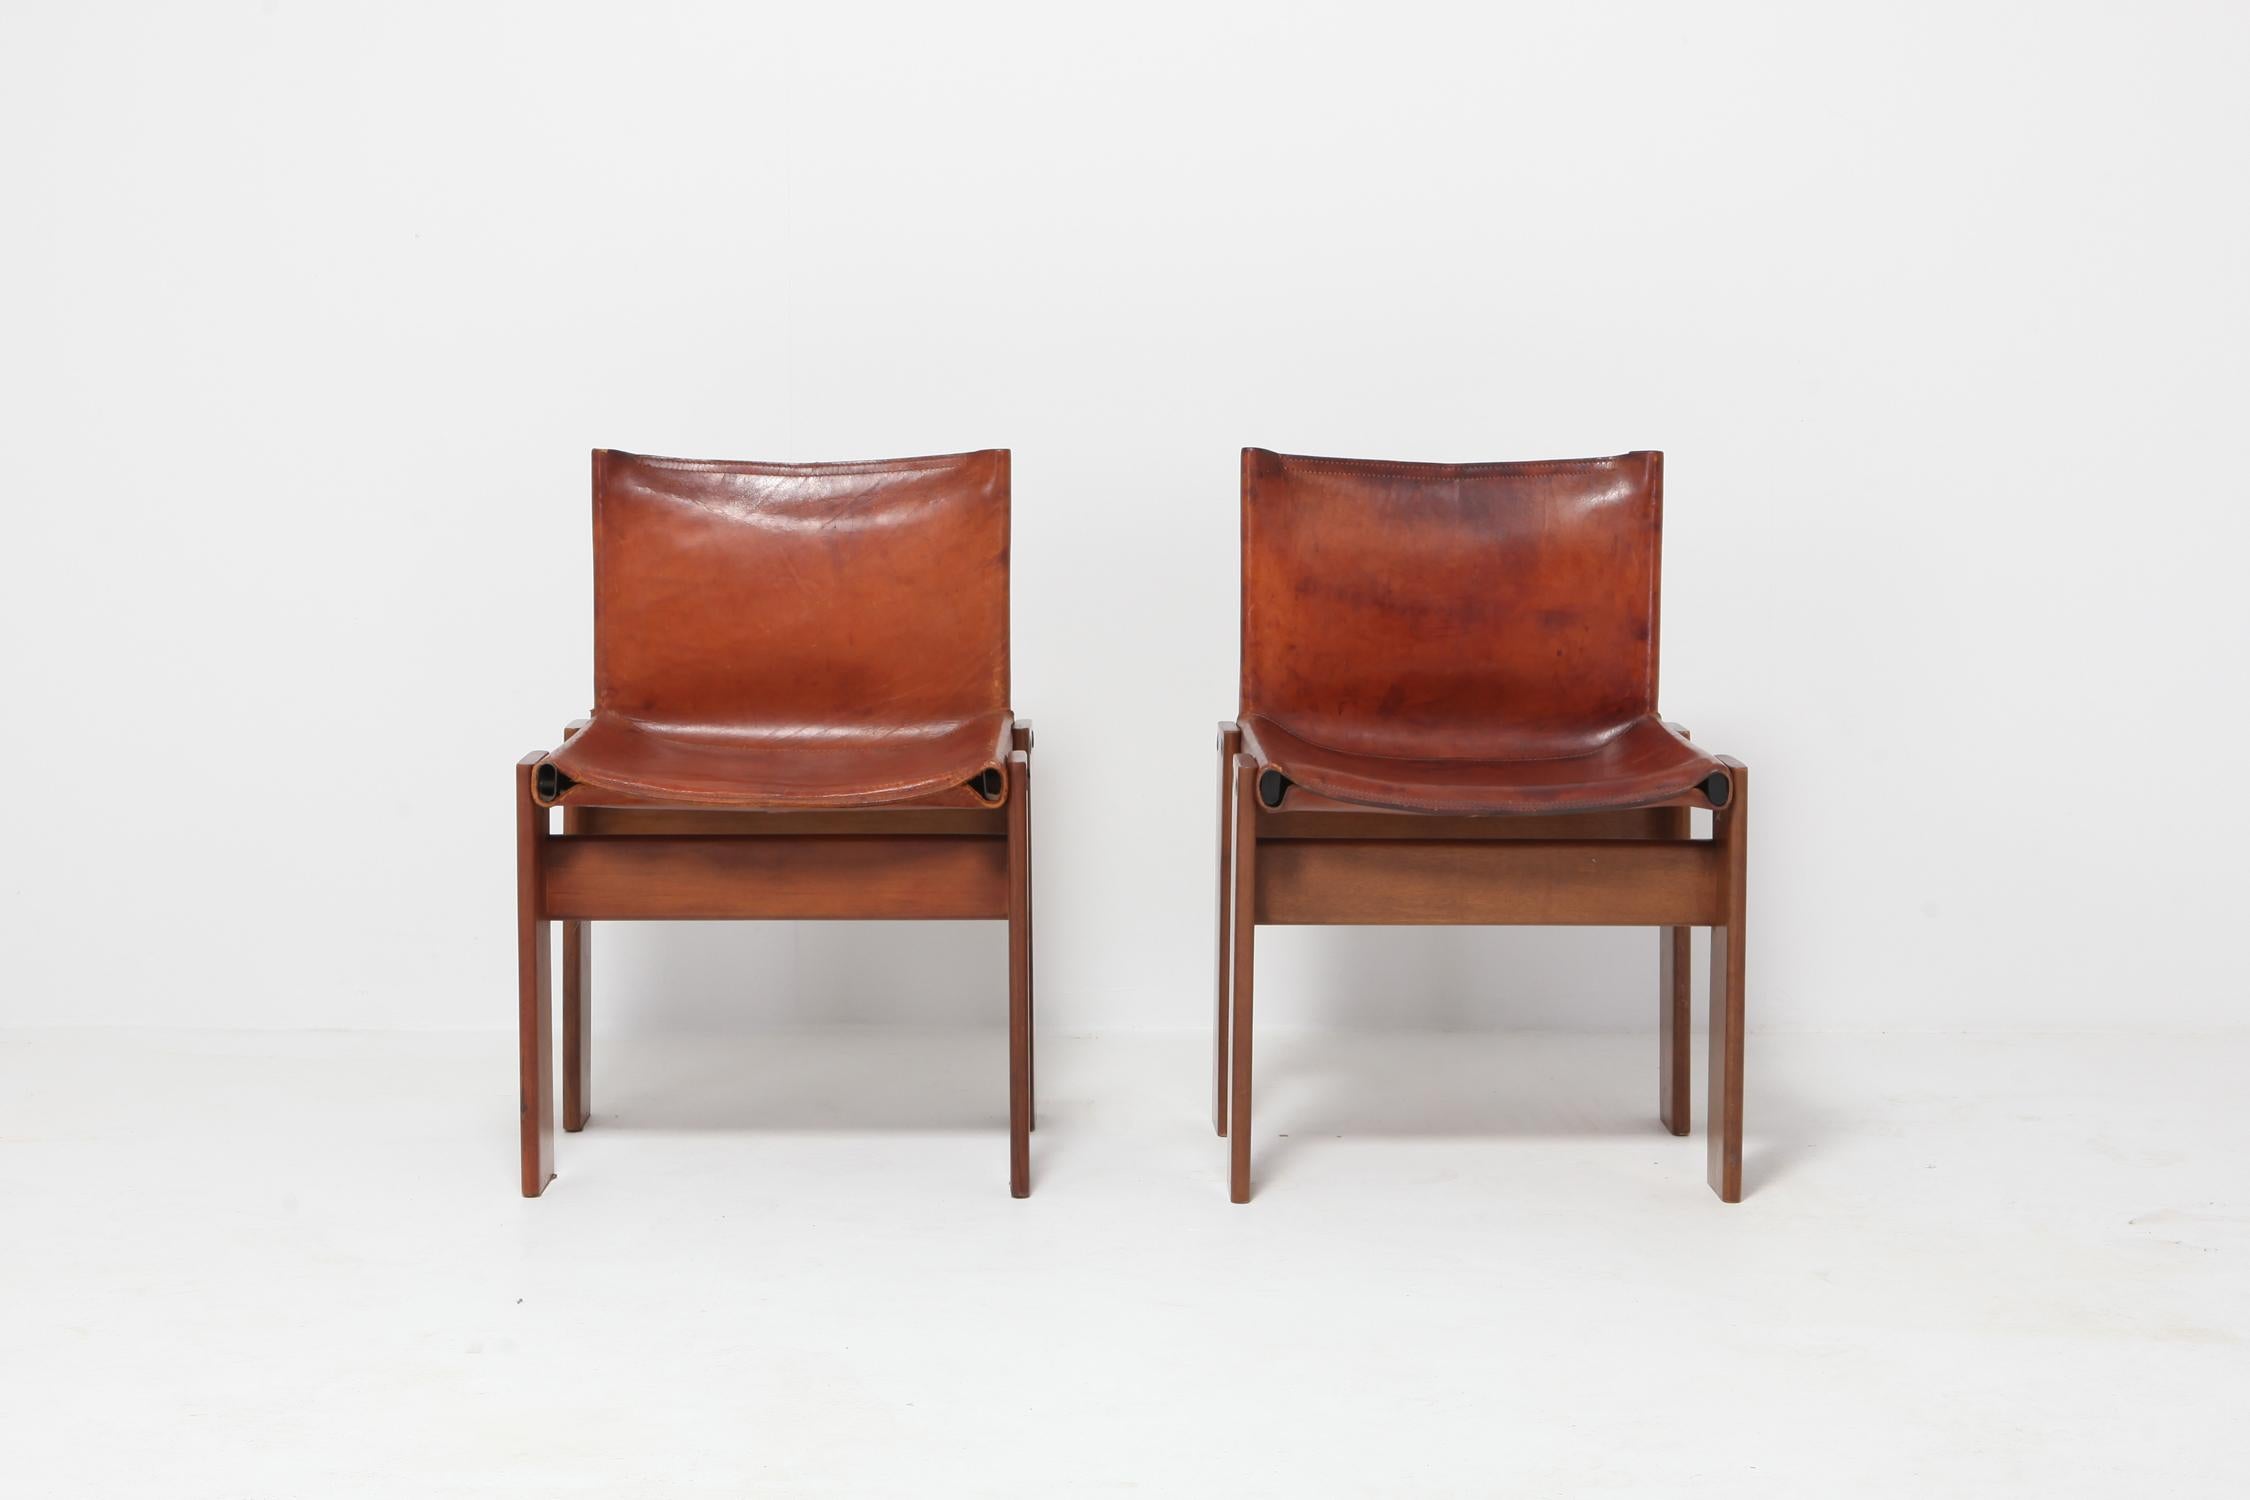 Scarpa 'Monk' Chairs in Patinated Cognac Leather, Set of Four 3